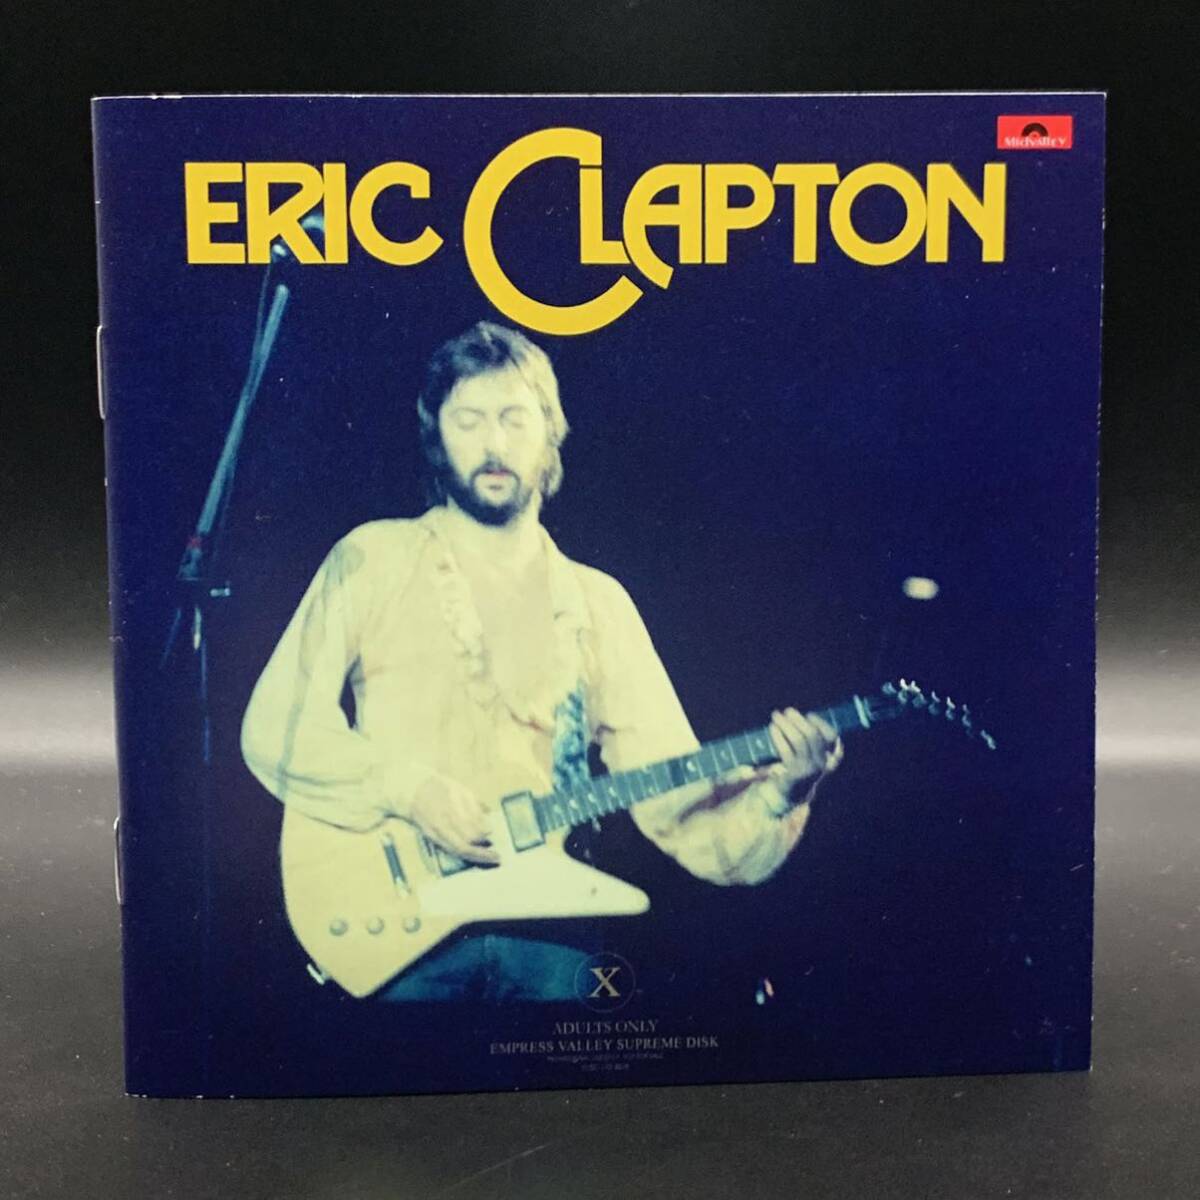 ERIC CLAPTON / TROPICAL SOUND SHOWER「亜熱帯武道館」(6CD BOX with Booklet) 初来日武道館3公演を全て初登場音源で収録した凄いやつ！の画像9